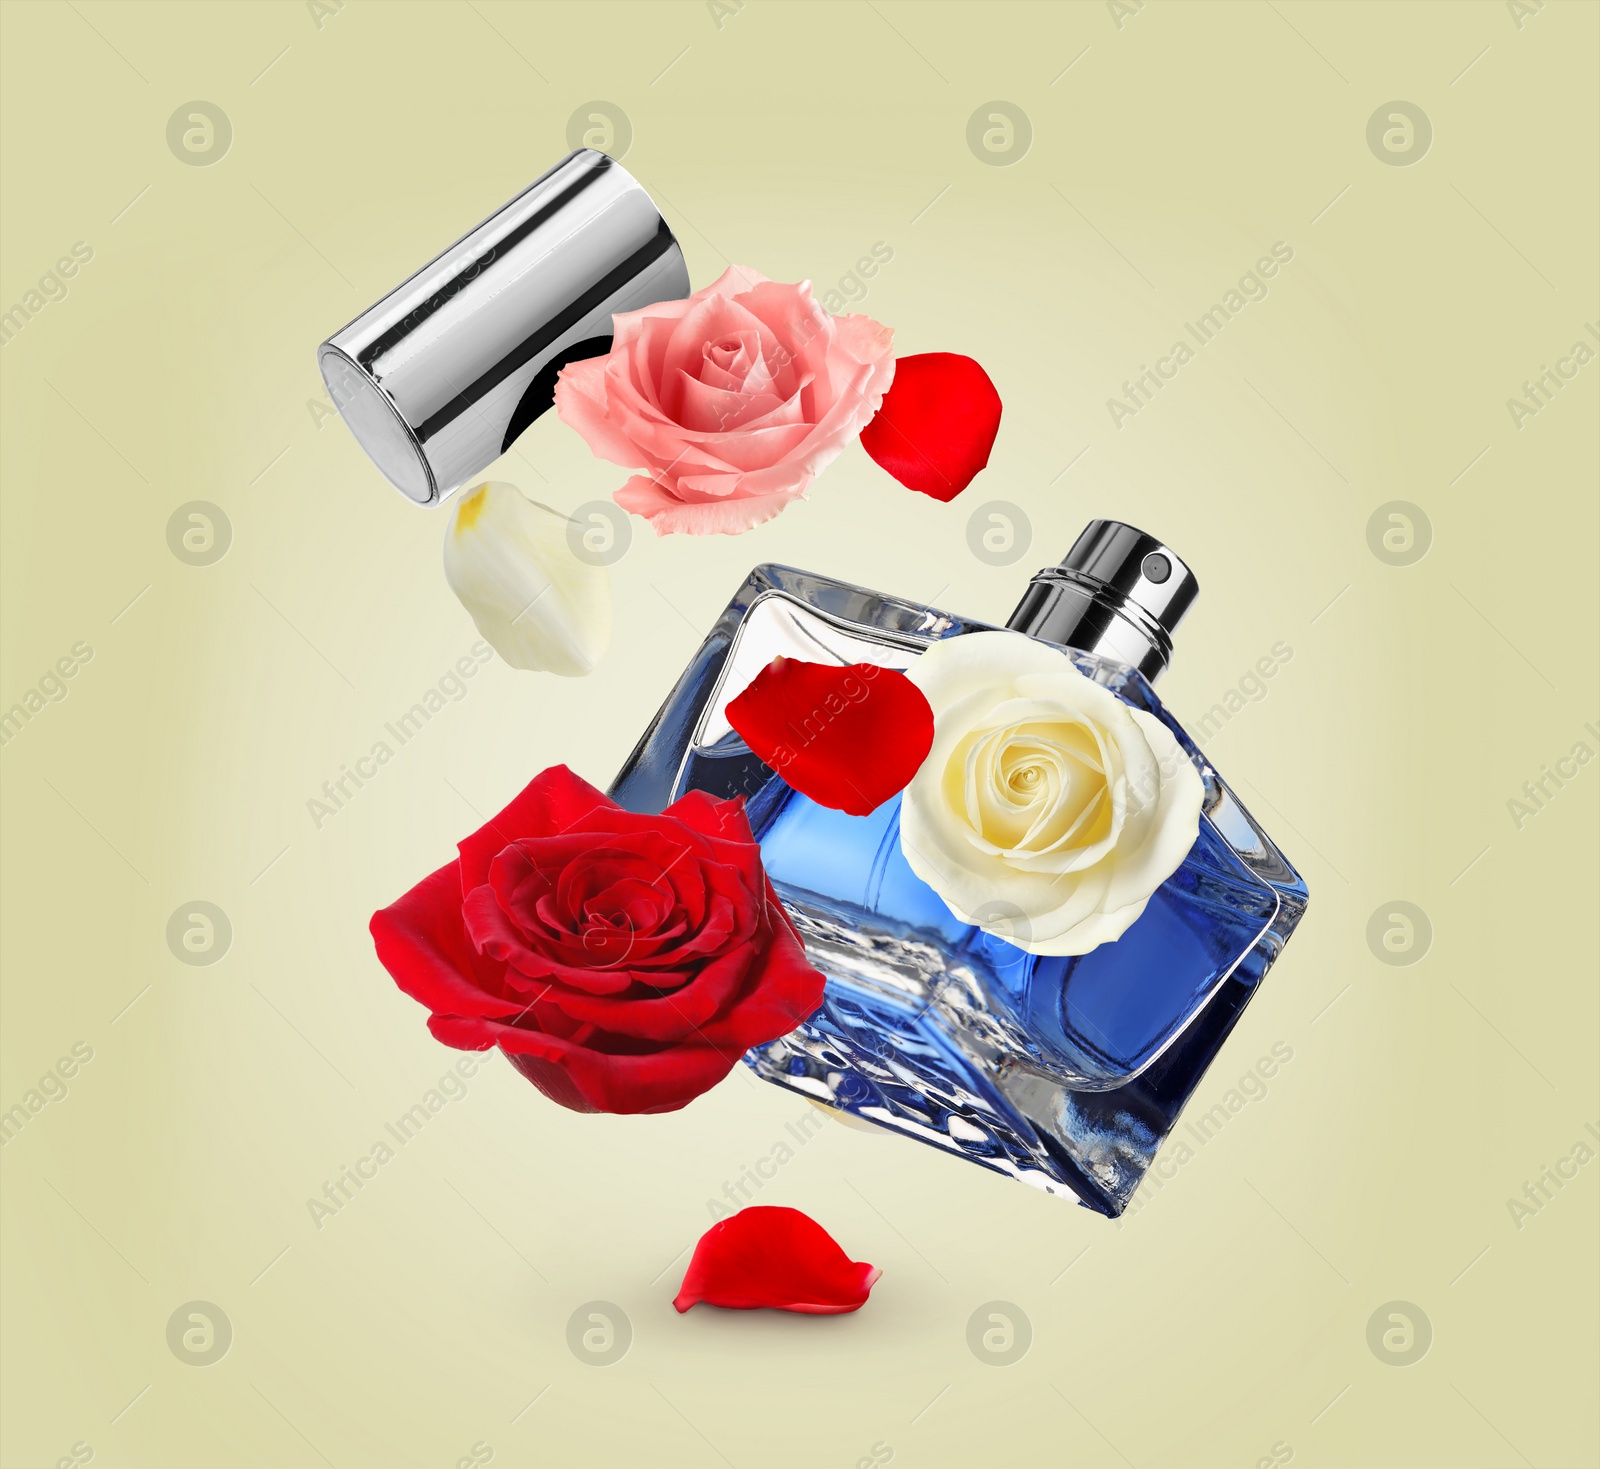 Image of Bottle of perfume and roses in air on pale yellow background. Flower fragrance